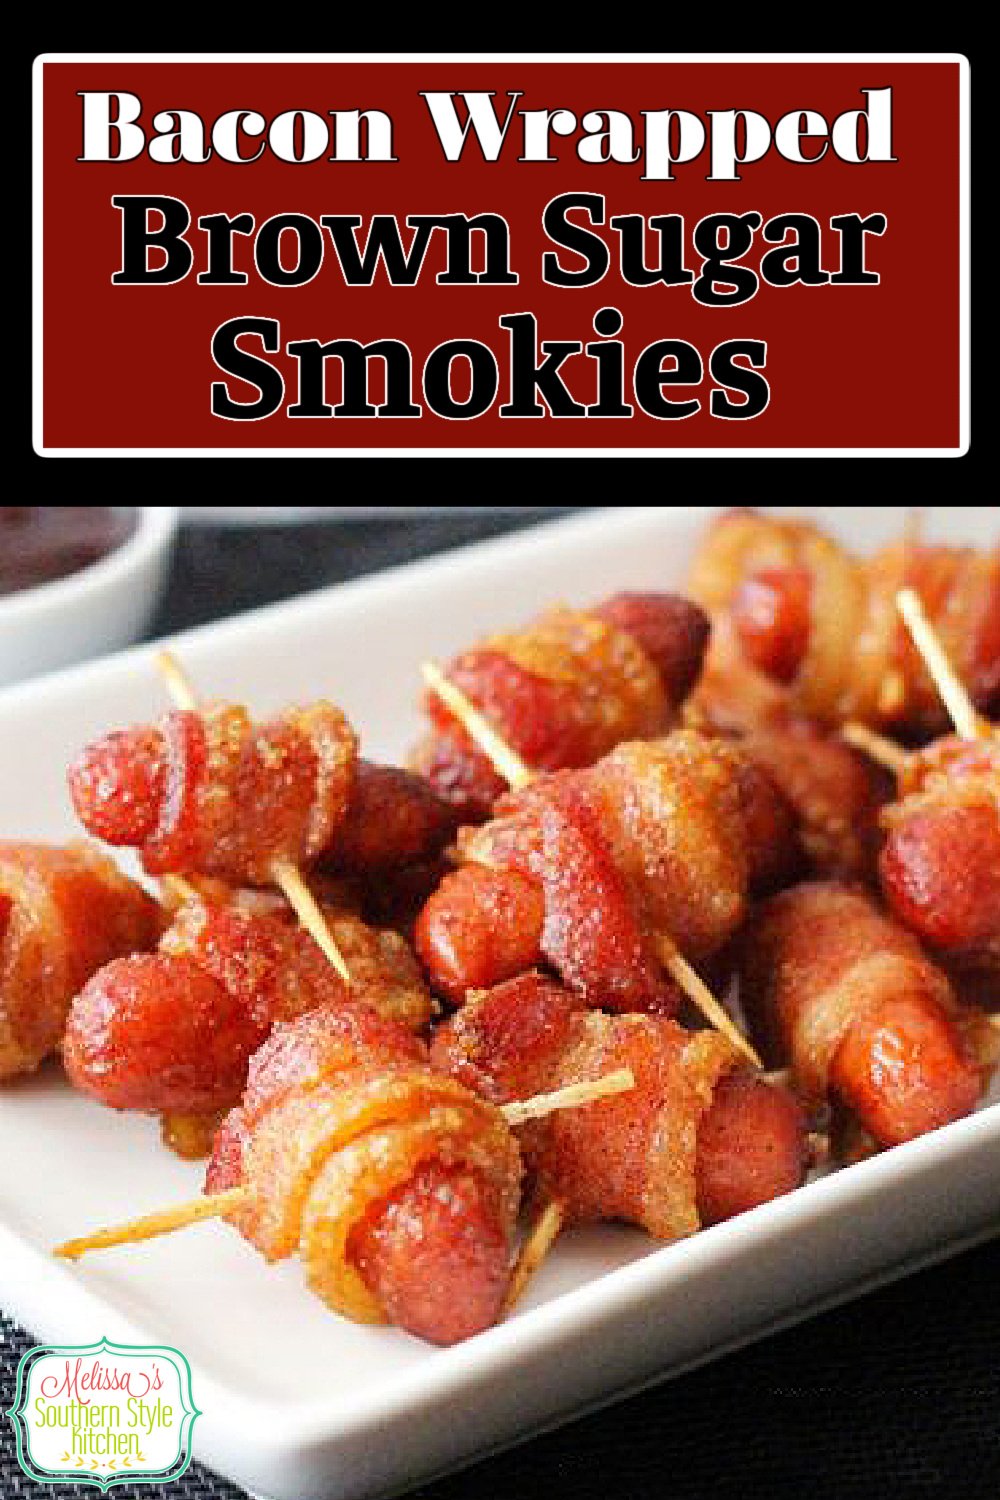 These sweet and spicy Bacon Wrapped Brown Sugar Smokies are the epitome of bite-size appetizers people love #smokies #brownsugarsmokies #bacon #baconwrappedsmokies #easyappetizers #smokedsausage #sausagerecipes #gamedaysnacks #footballfood #holidayrecipes #southernfood #southernrecipes via @melissasssk